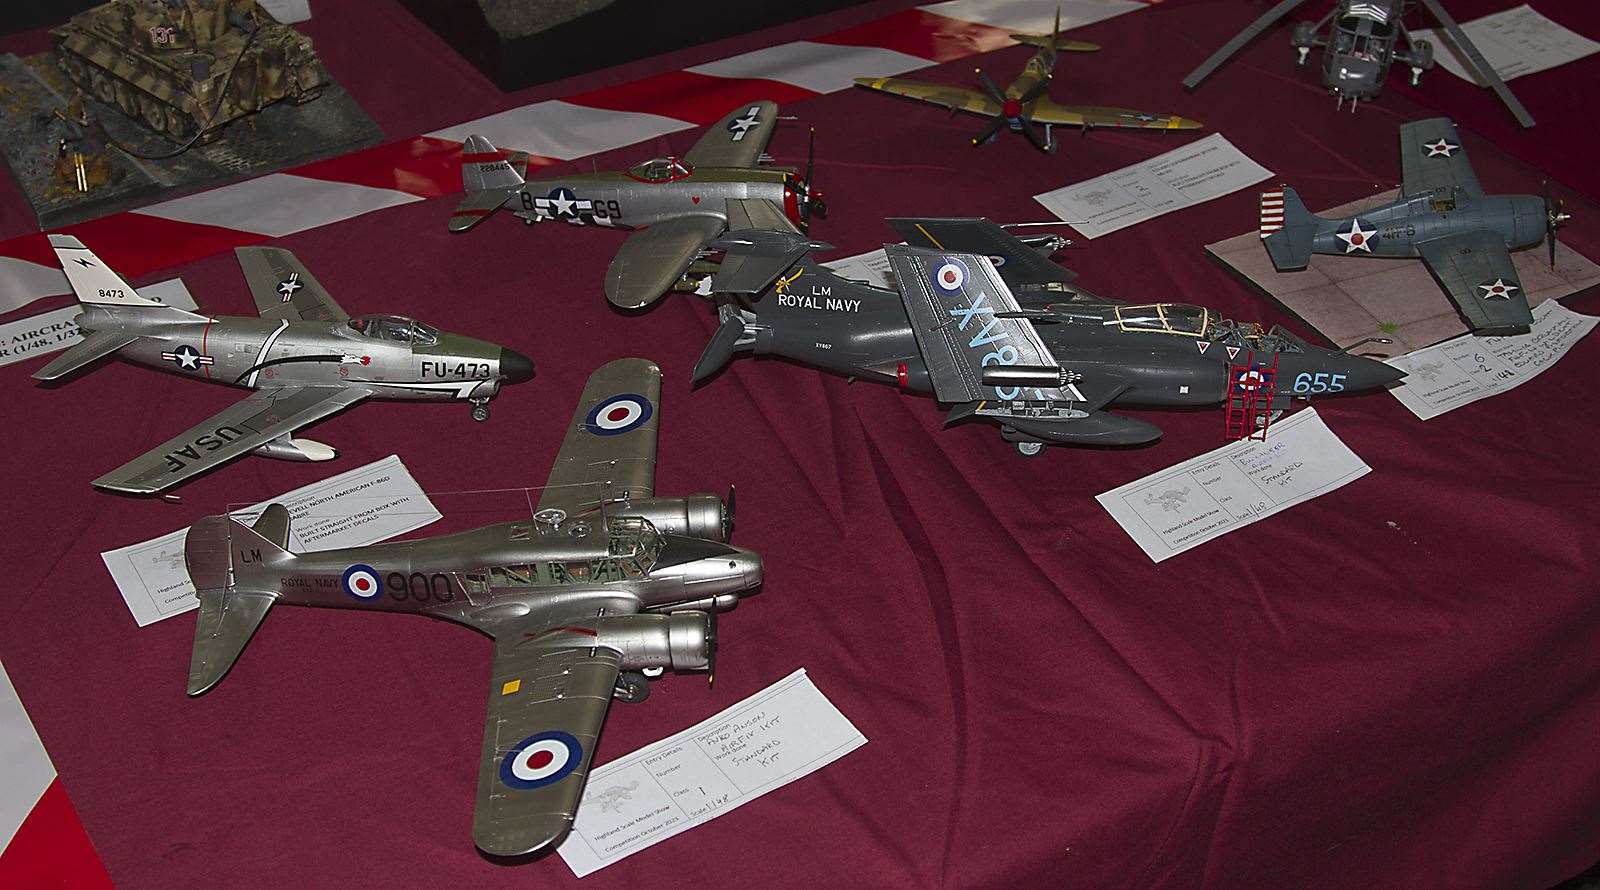 A section of the Kinloss and Forres Model Club display including an Avro Anson, North American F-86D Sabre, Republic P-47D Thunderbolt, Blackurn Buccaneer, Grumman Wildcat and Supermarine Spitfire.